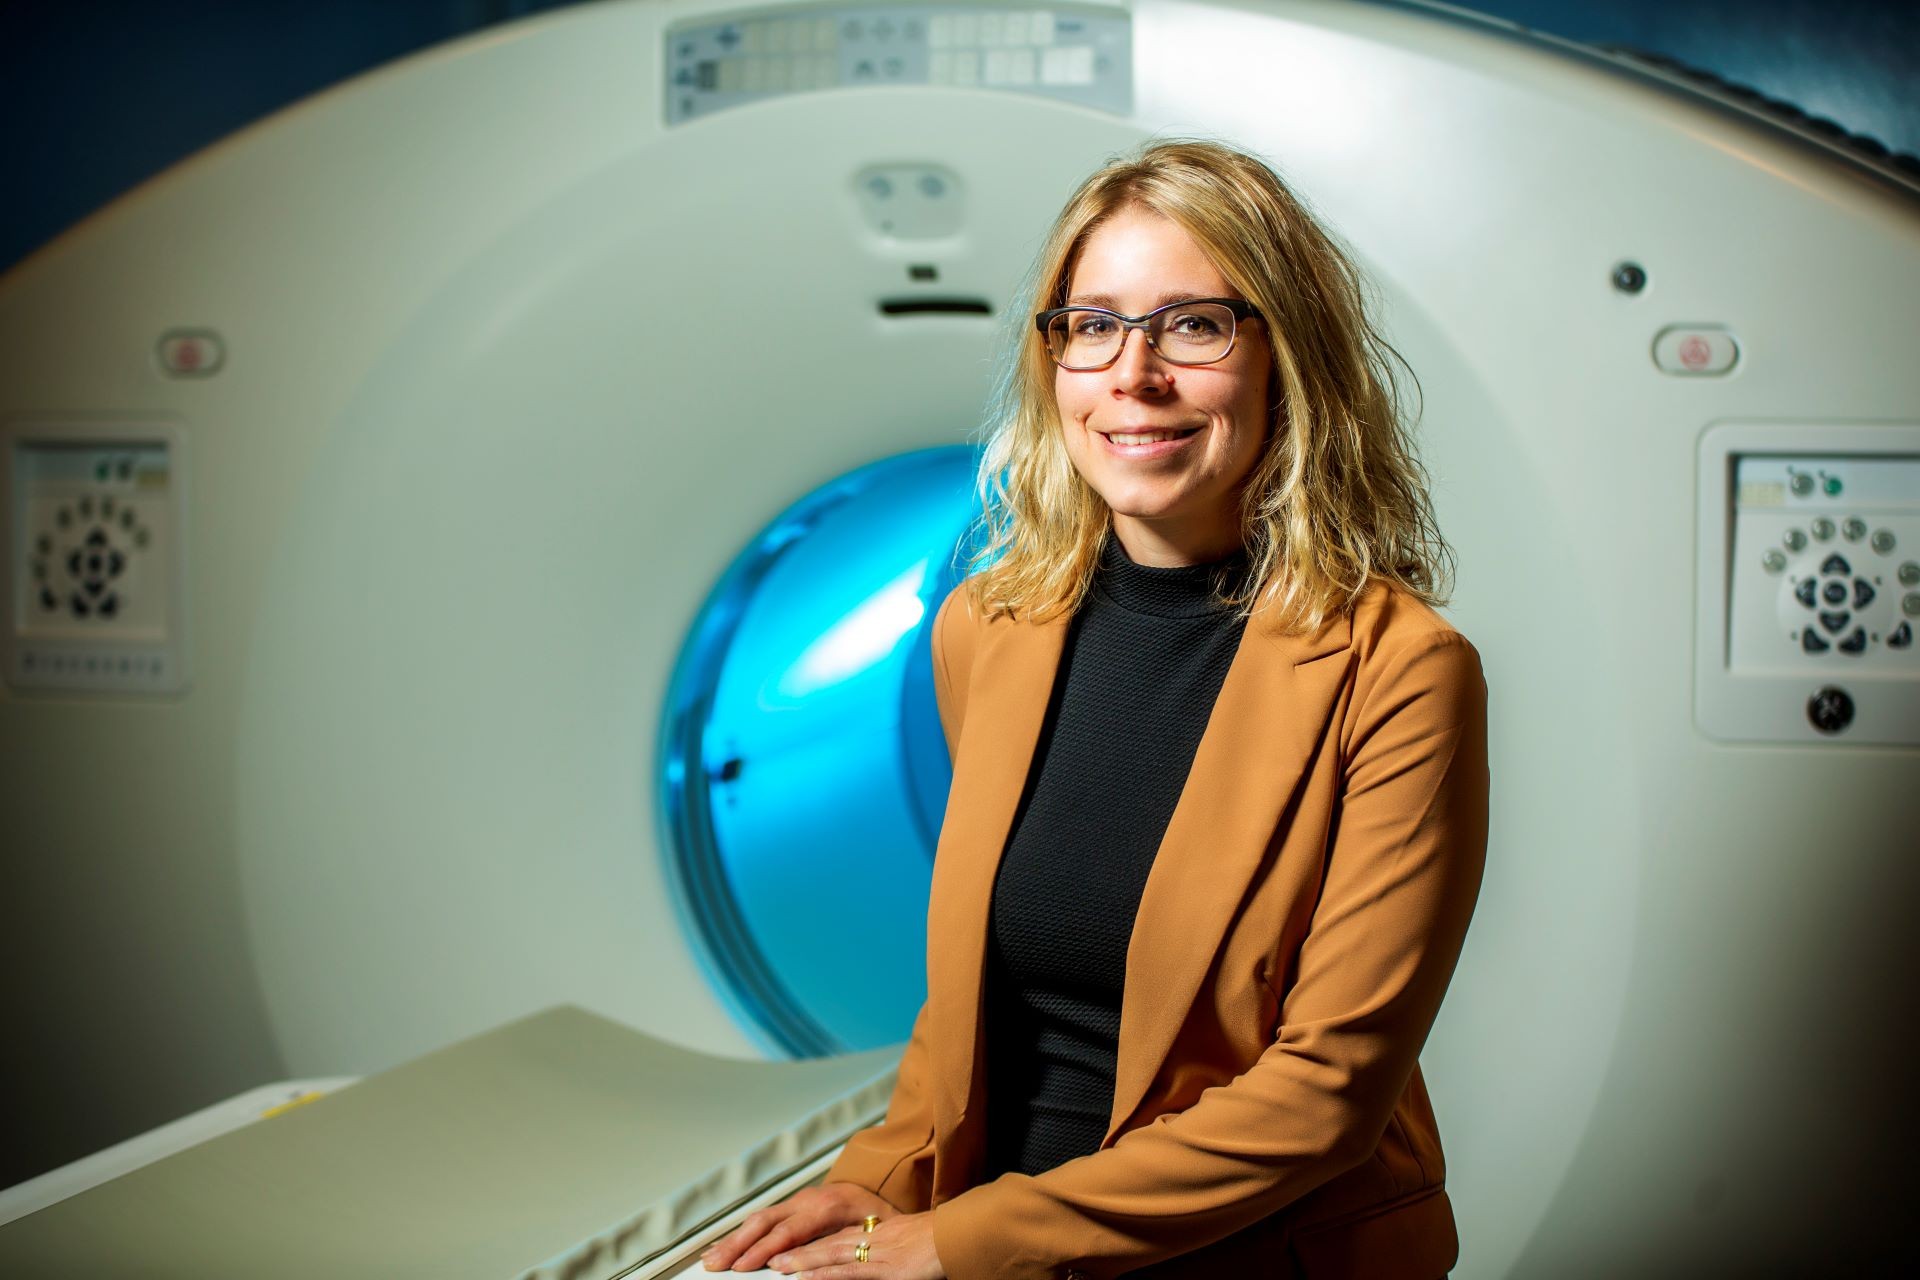 Maryse Fortin wears a brown jacket over a black shirt and sits in front of an MRI machine